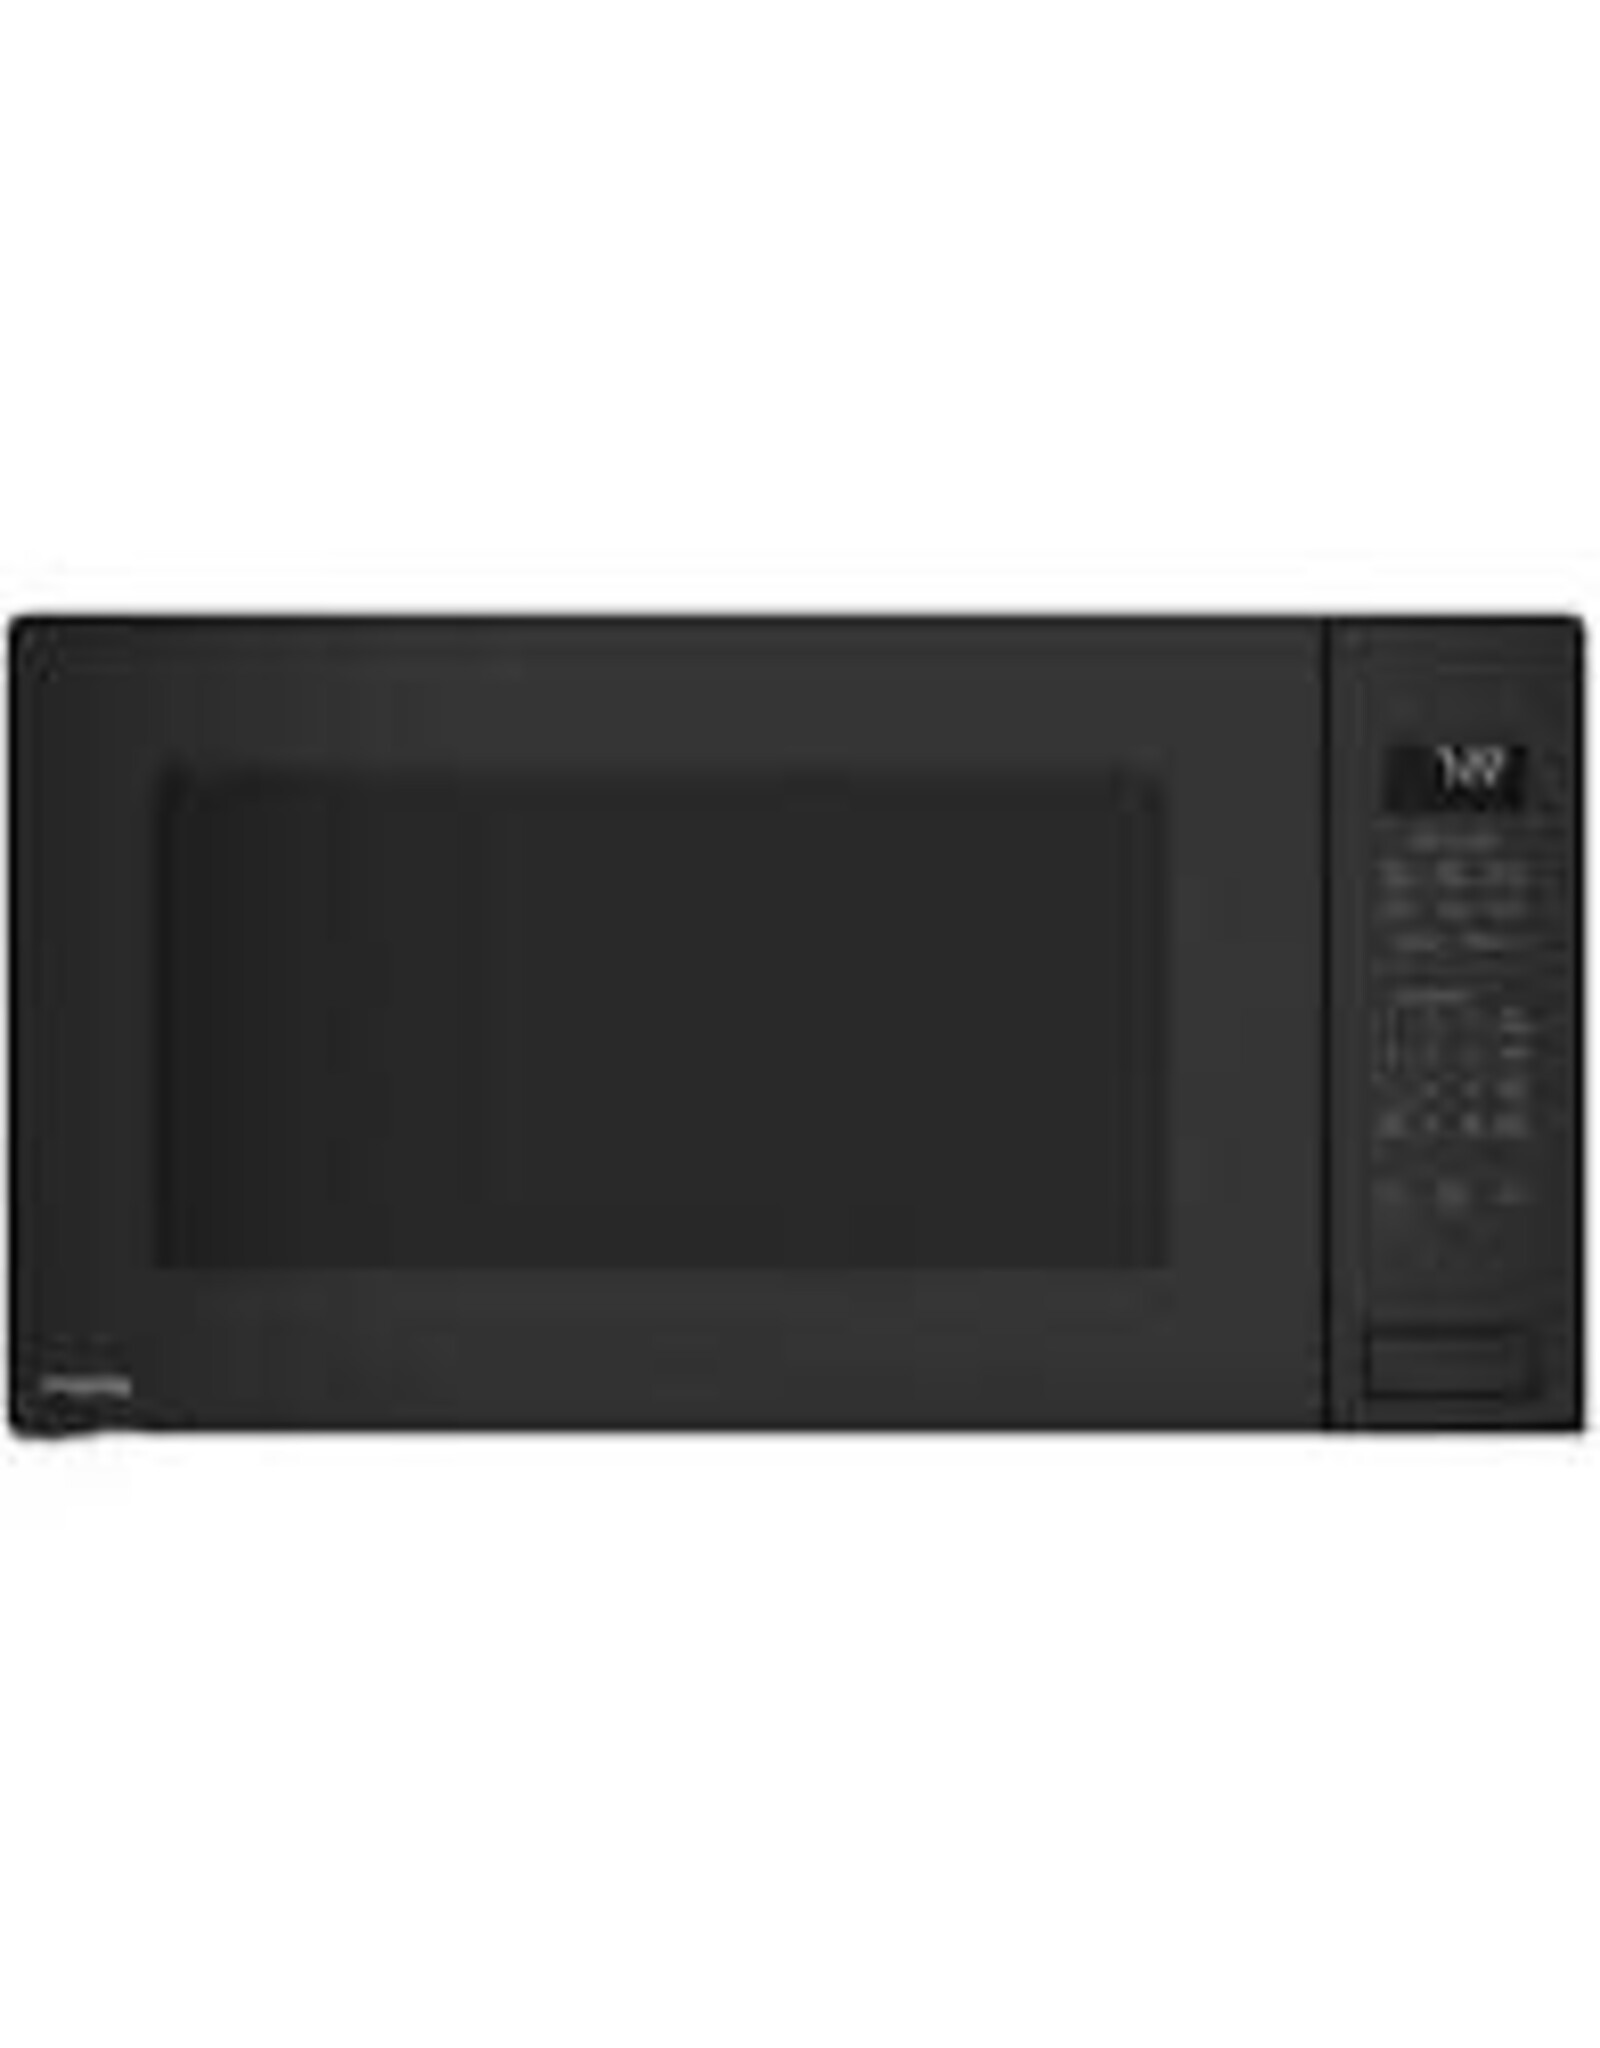 GE PROFILE PEB7227ANDD GE Profile™ 2.2 cu. ft. Countertop Microwave in Gray with Sensor Cooking